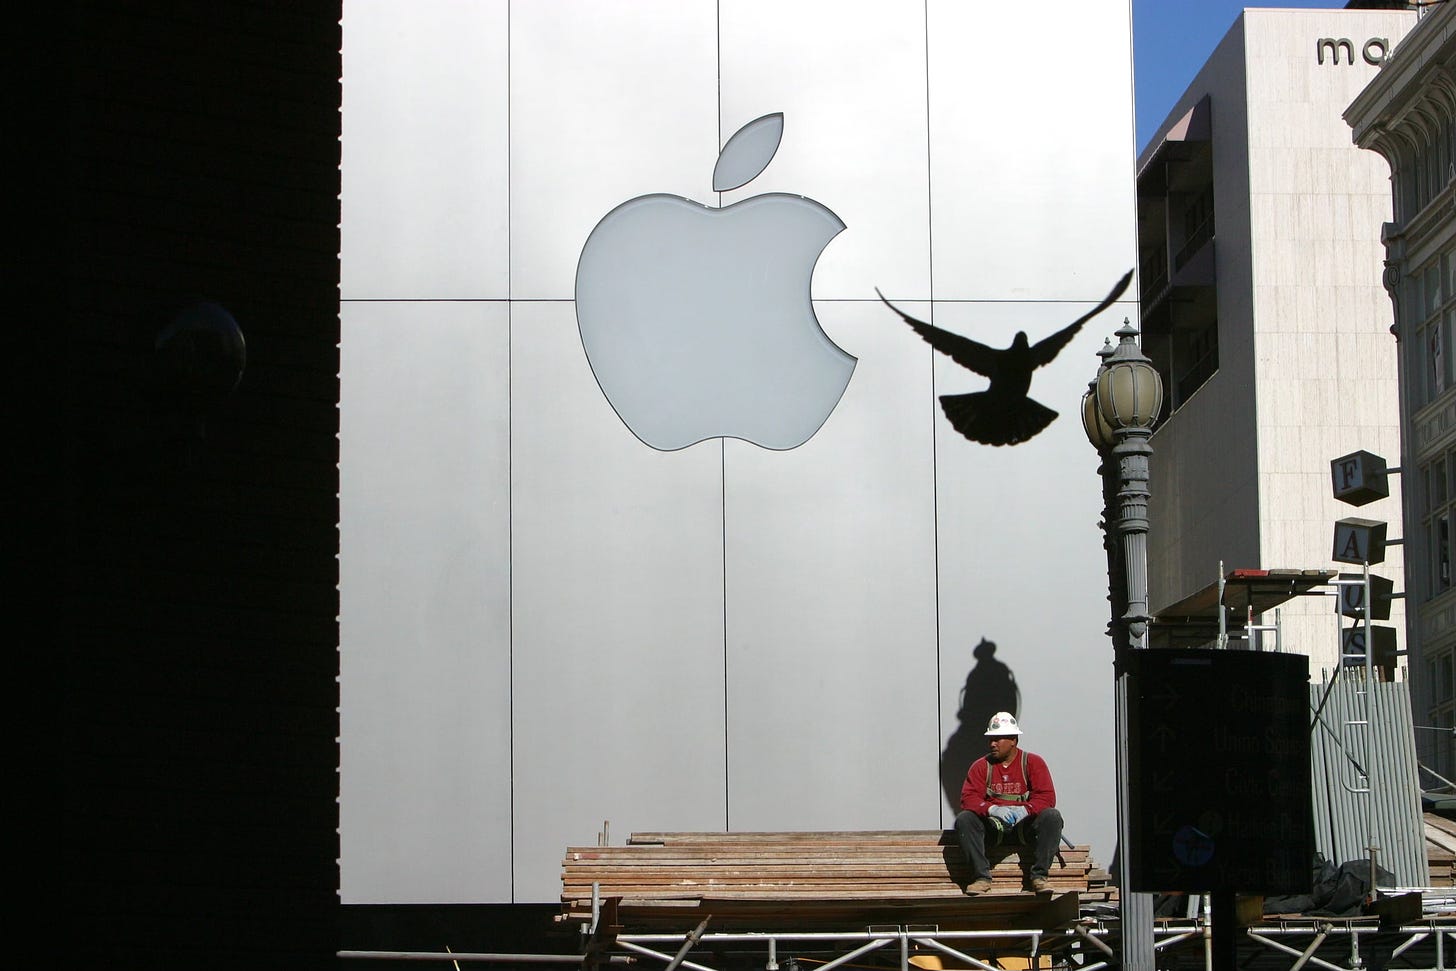 A worker sits on scaffolding outside The Apple Store, San Francisco. A silhouette of a flying bird is in the foreground.